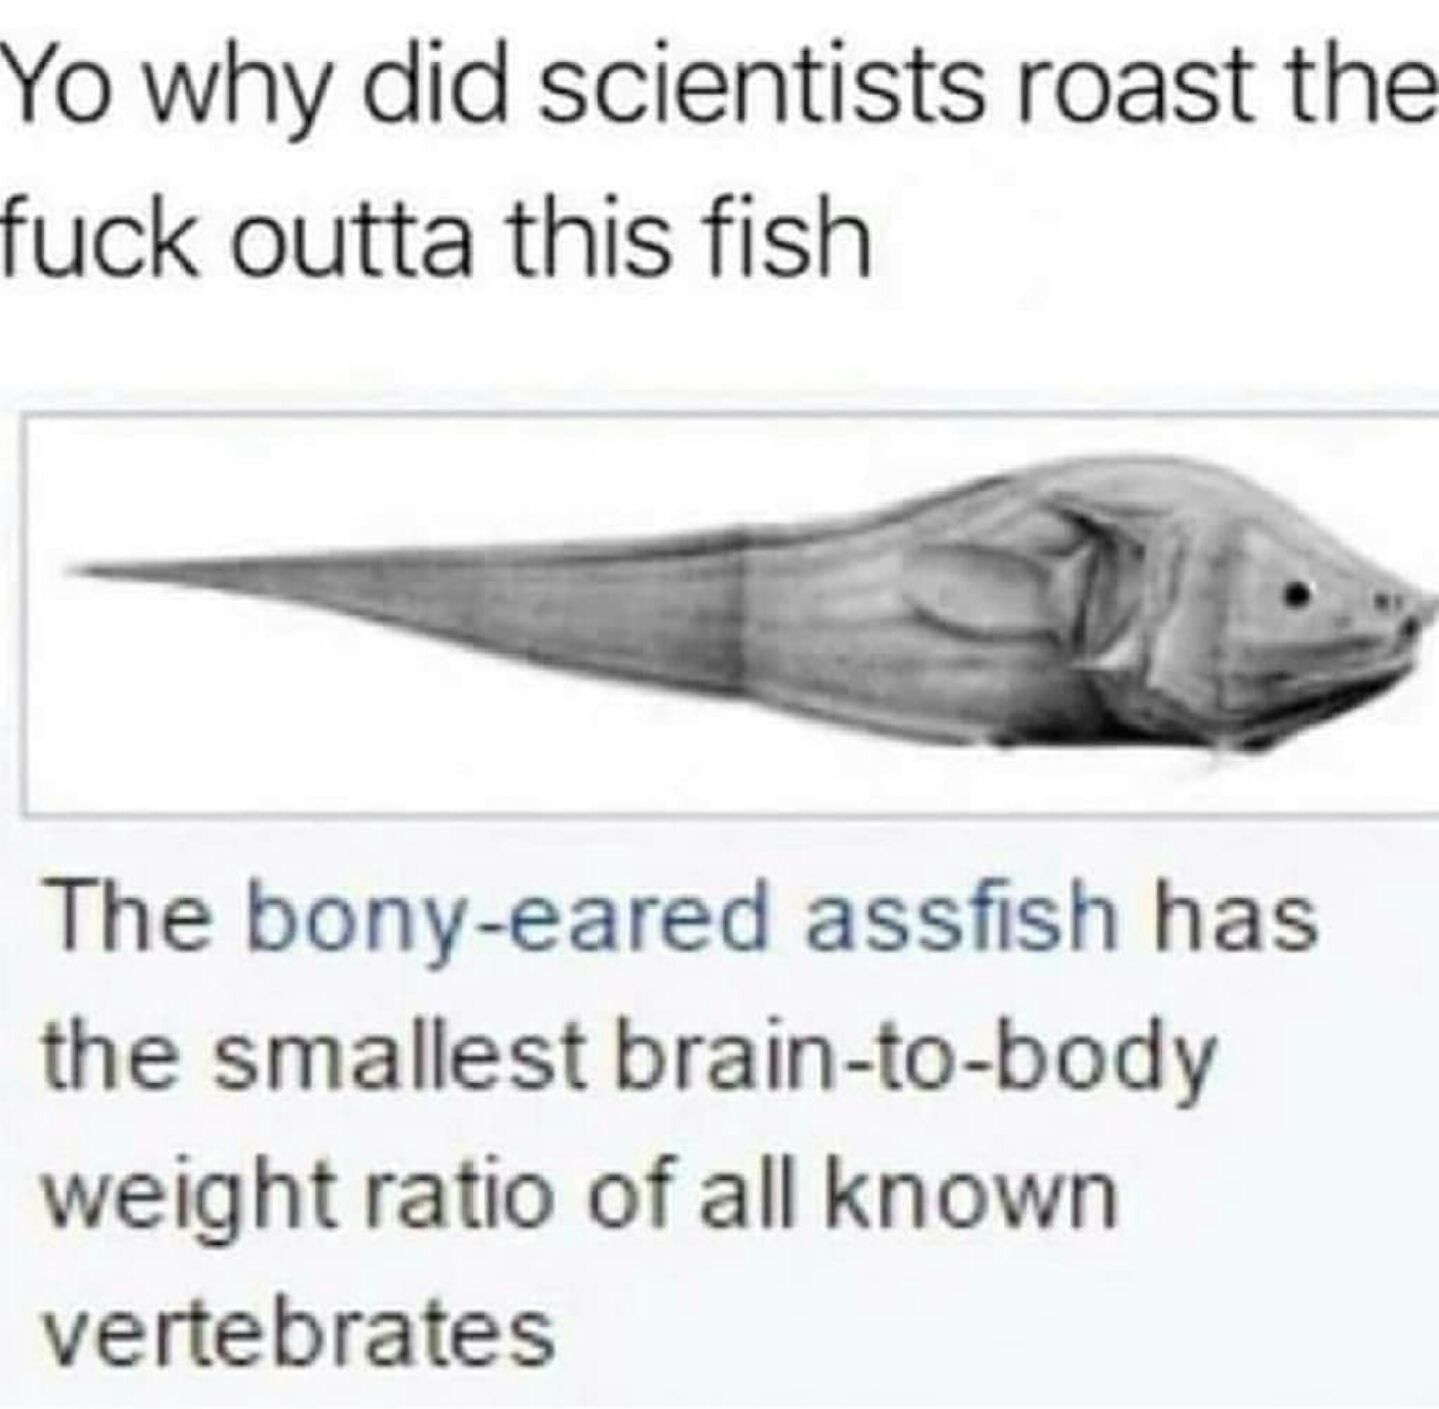 They roasted the shit outta this fish.